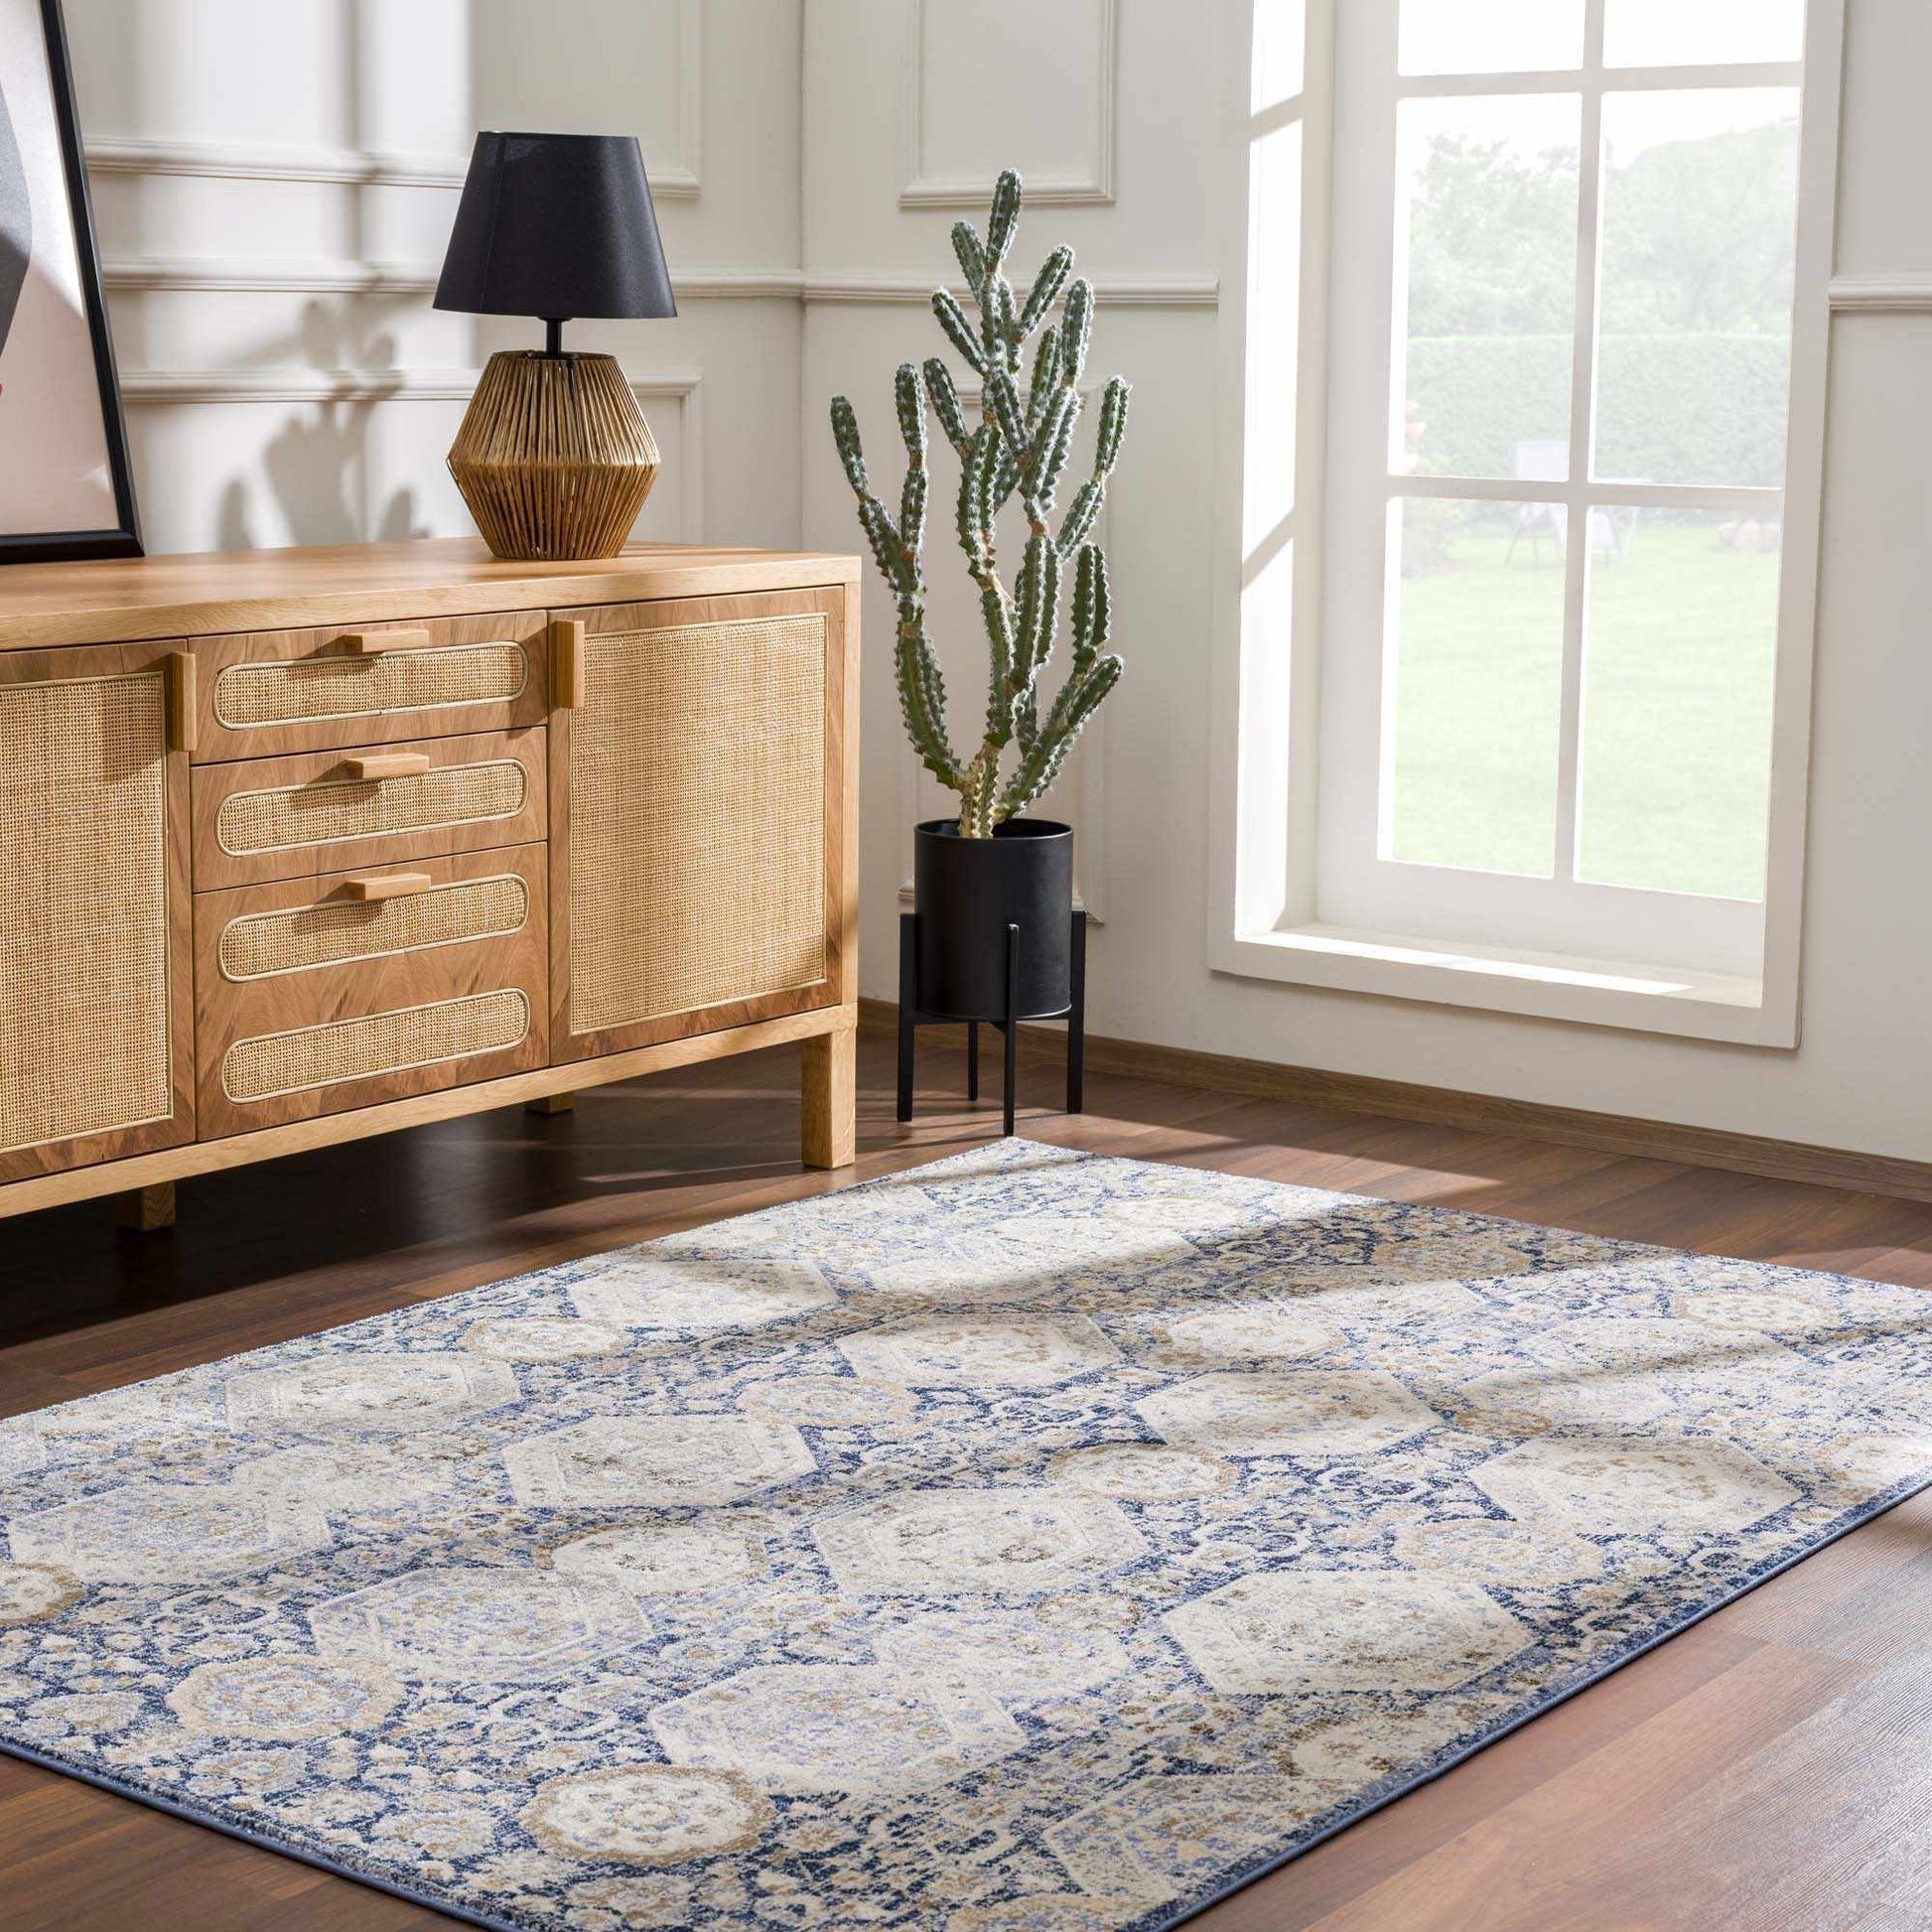 Parkerfield Blue Area Rug.